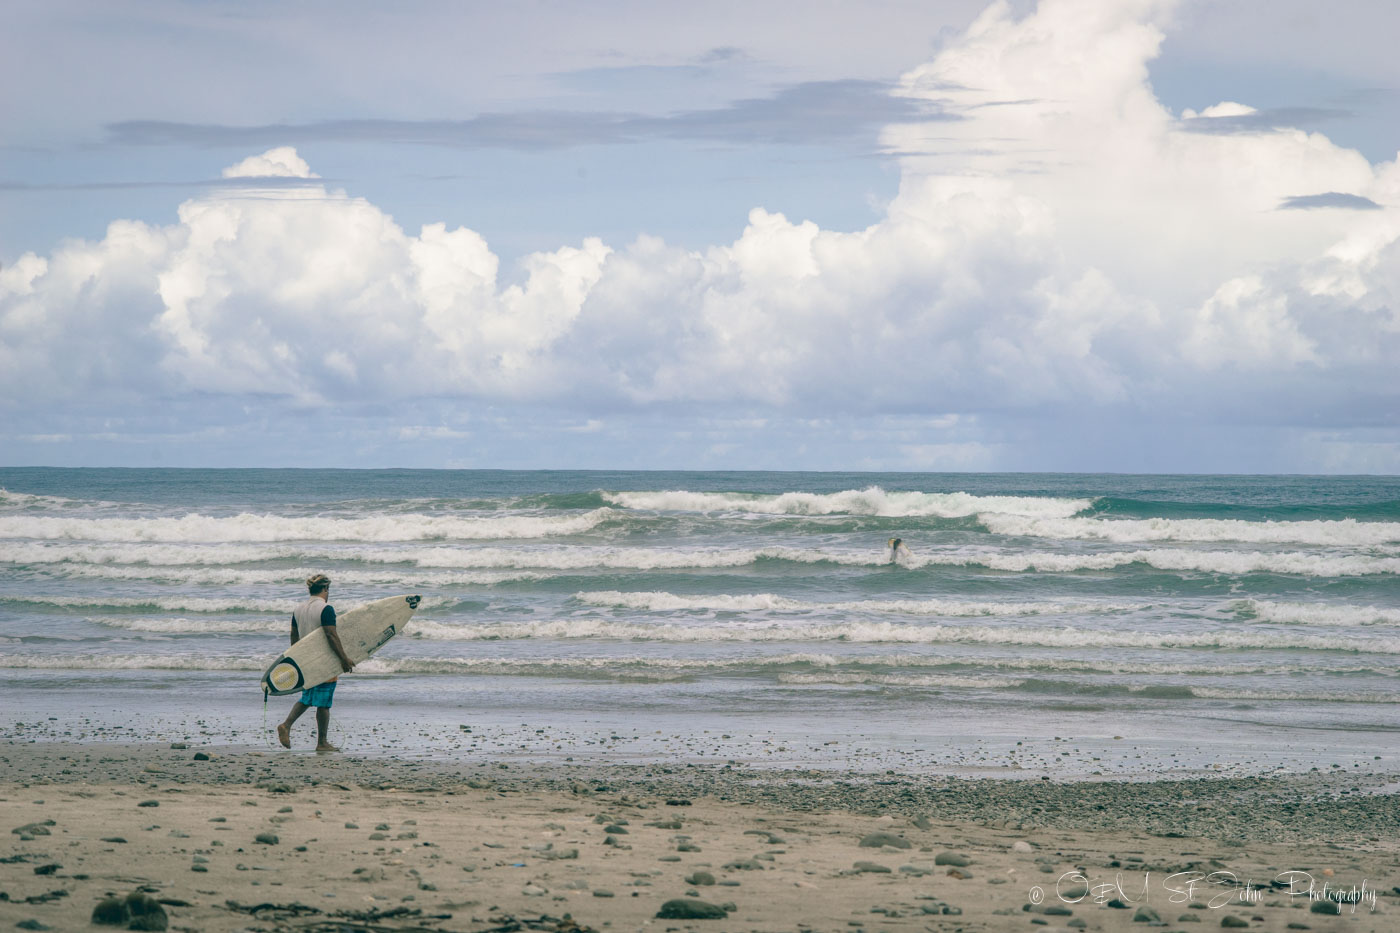 Surfing is a popular activity in this region.